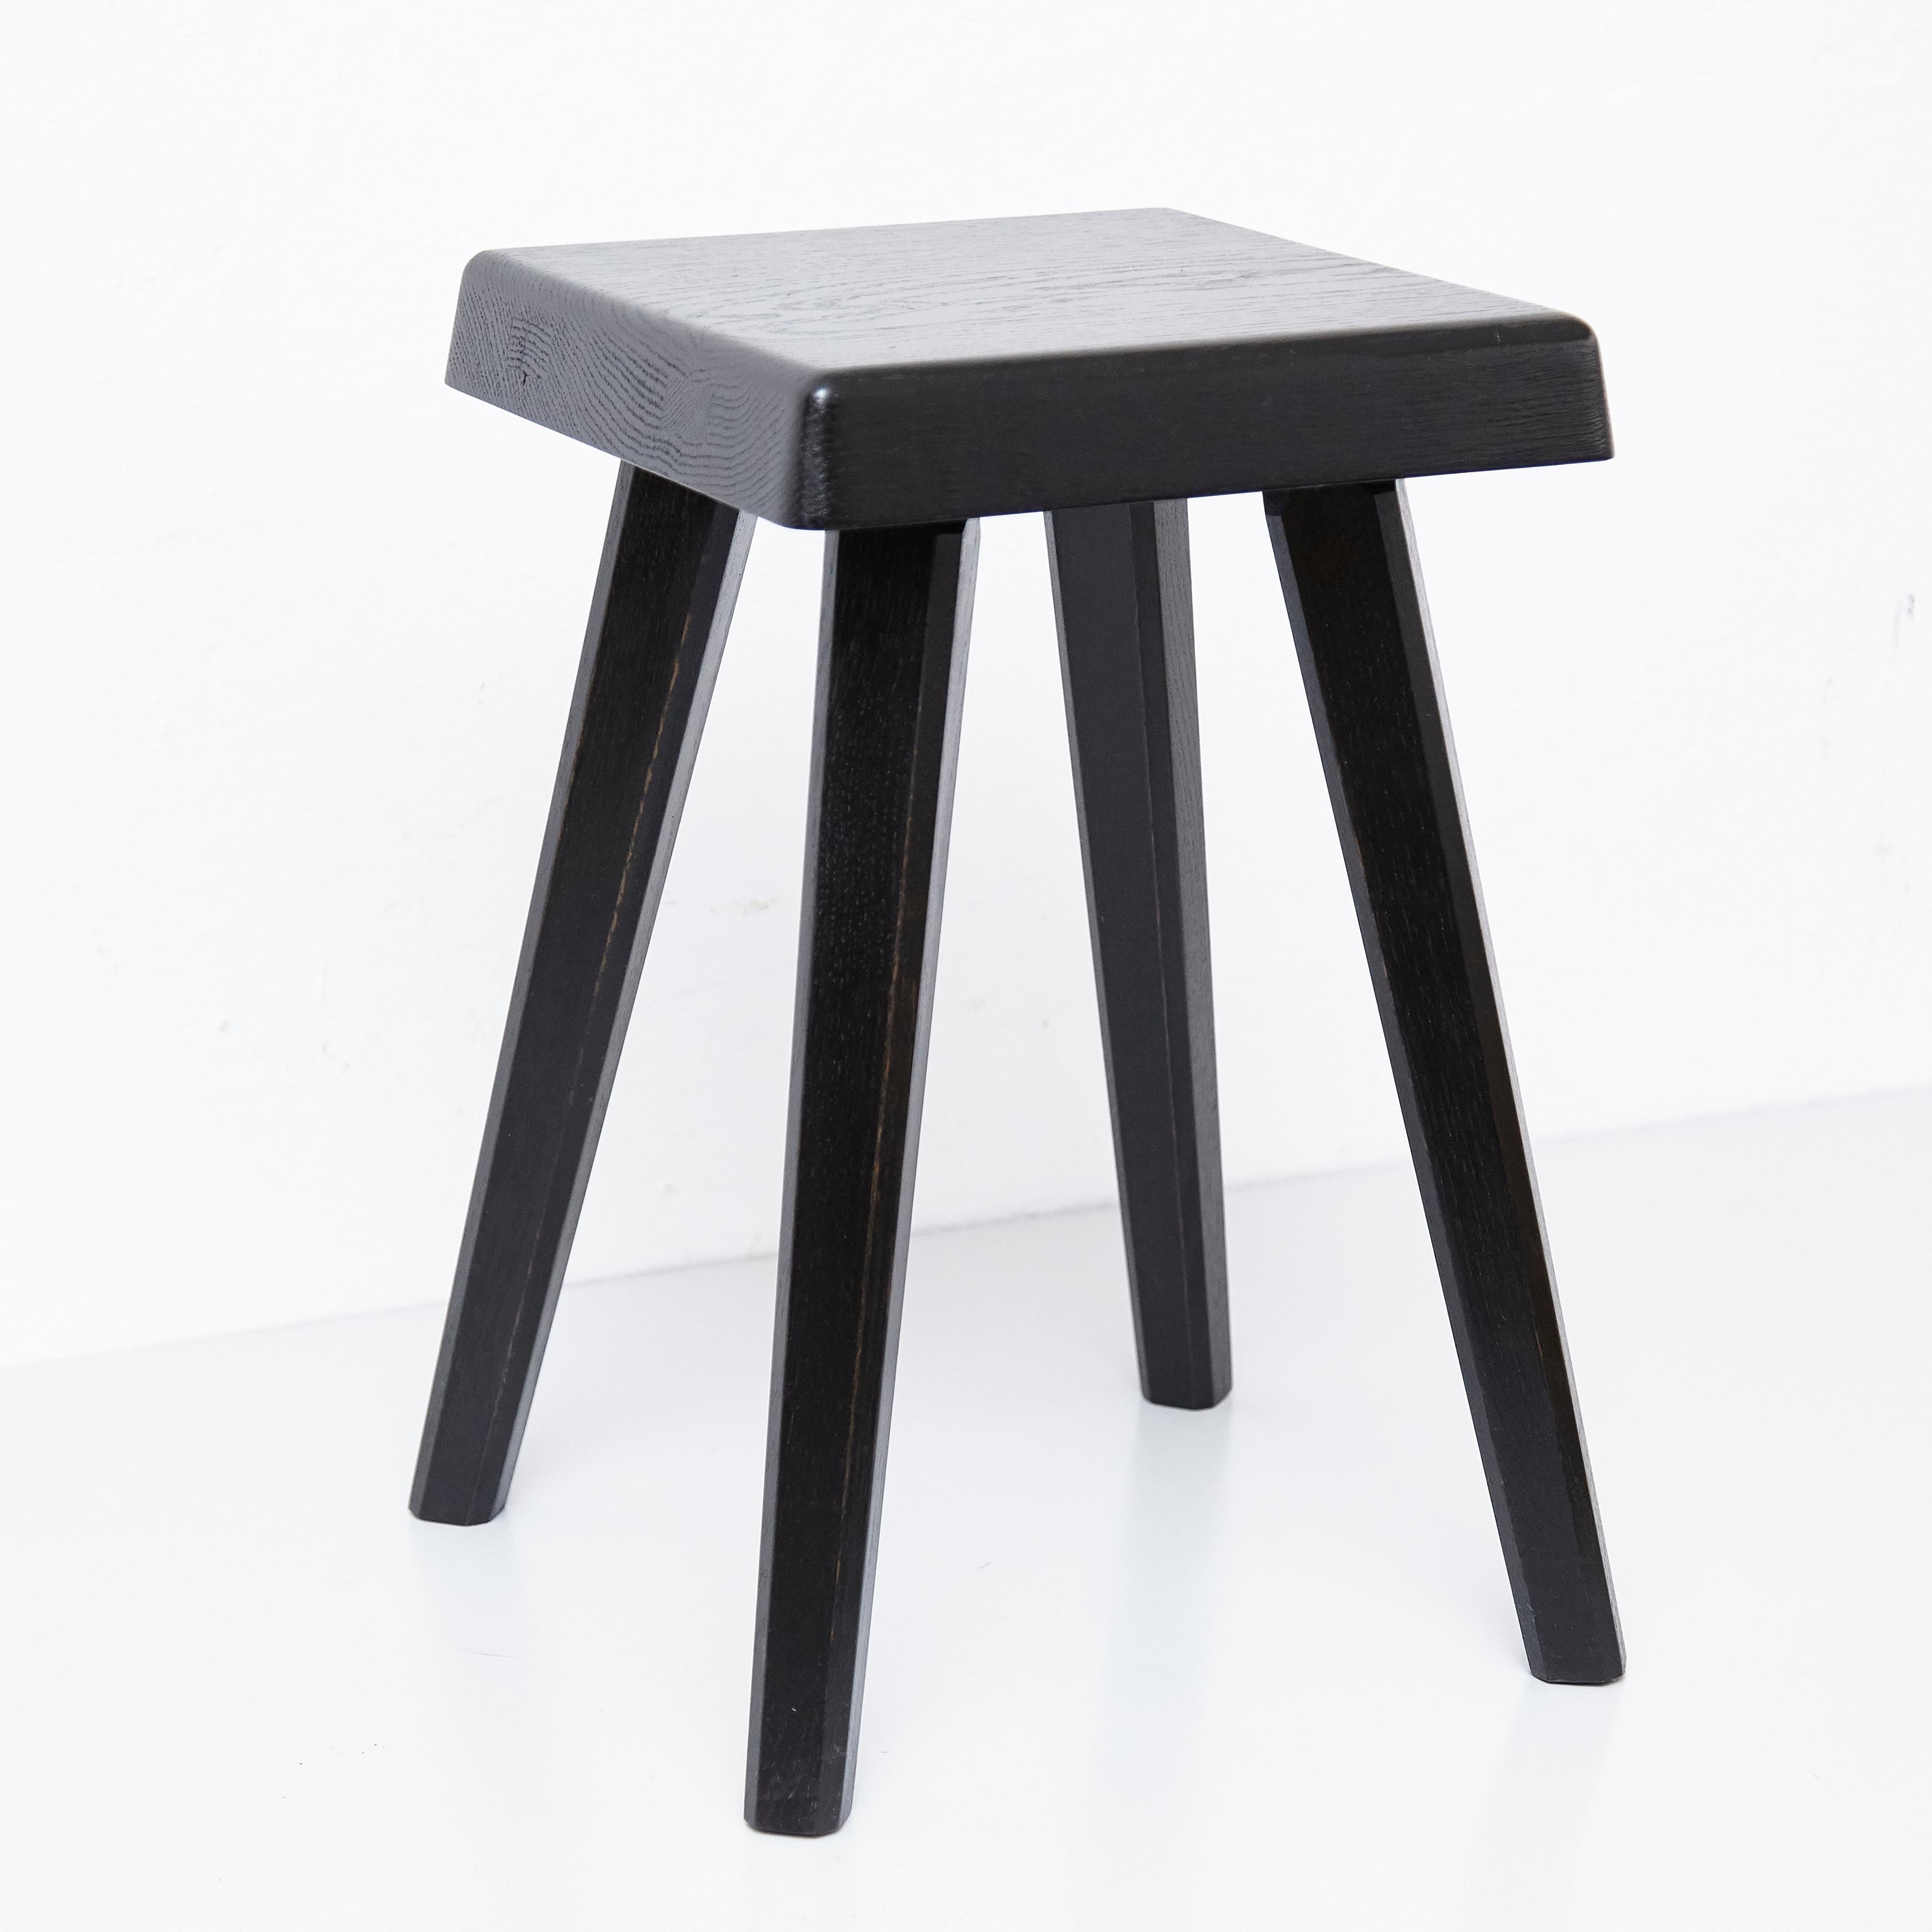 Special black edition stool designed by Pierre Chapo, manufactured in France, 1960s.
Manufactured by Chapo creations in 2019

Solid elmwood.

In good original condition, with minor wear consistent with age and use, preserving a beautiful